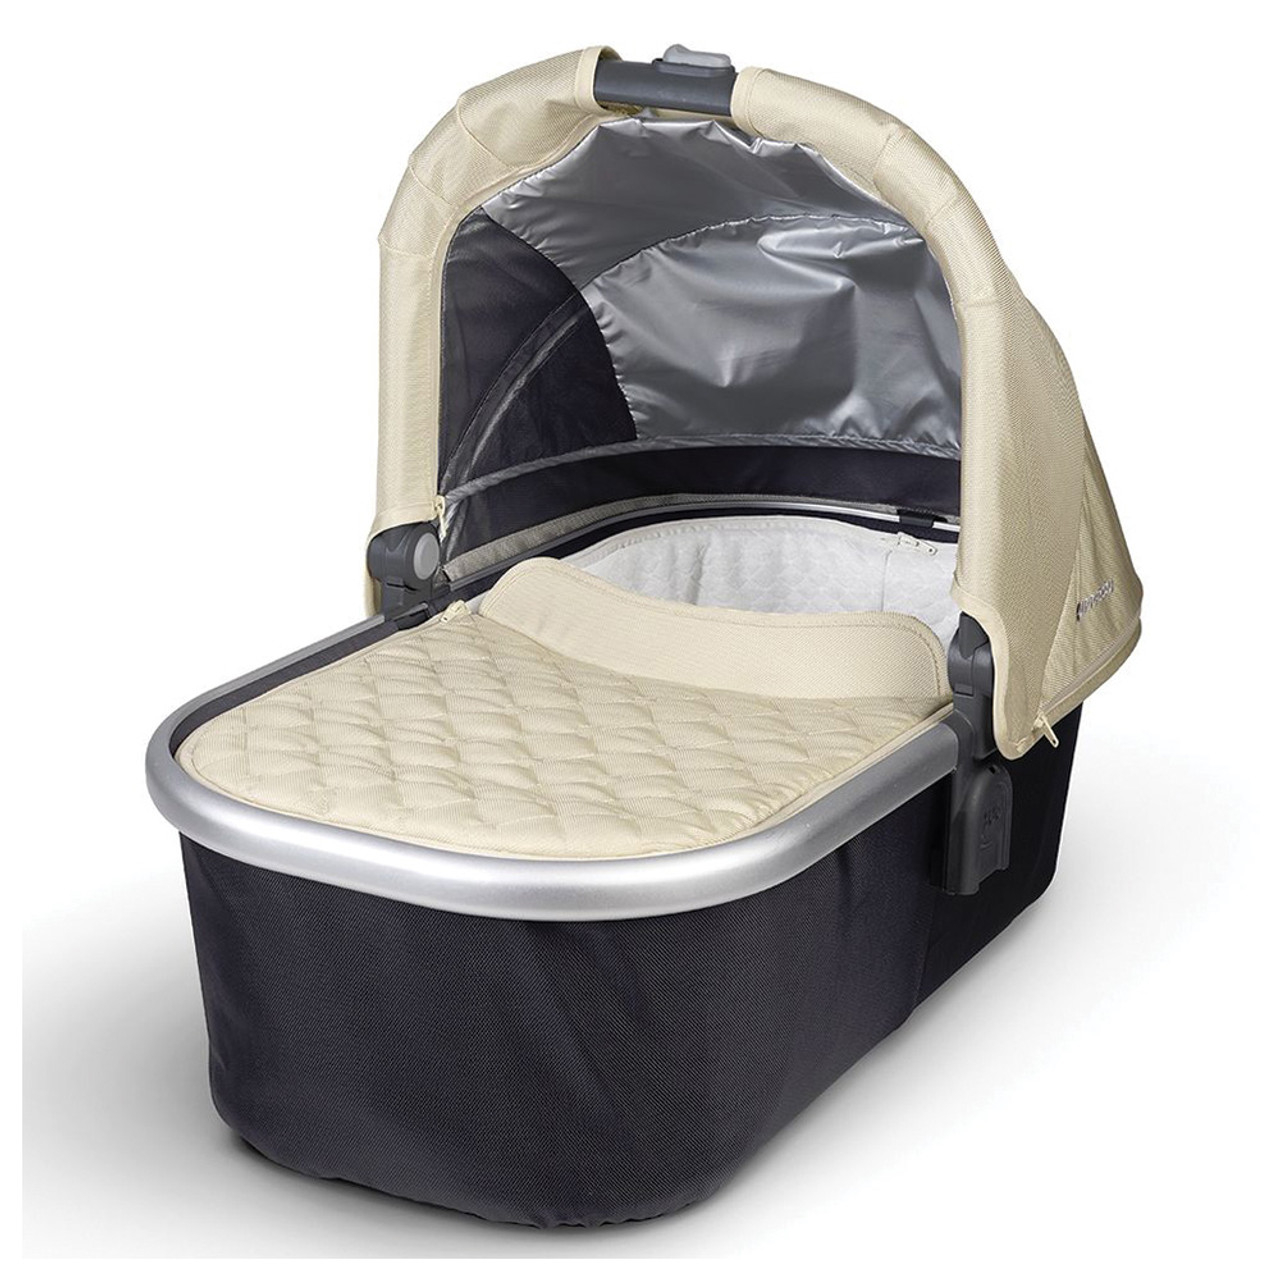 Mattress Cover for Bassinet - UPPAbaby